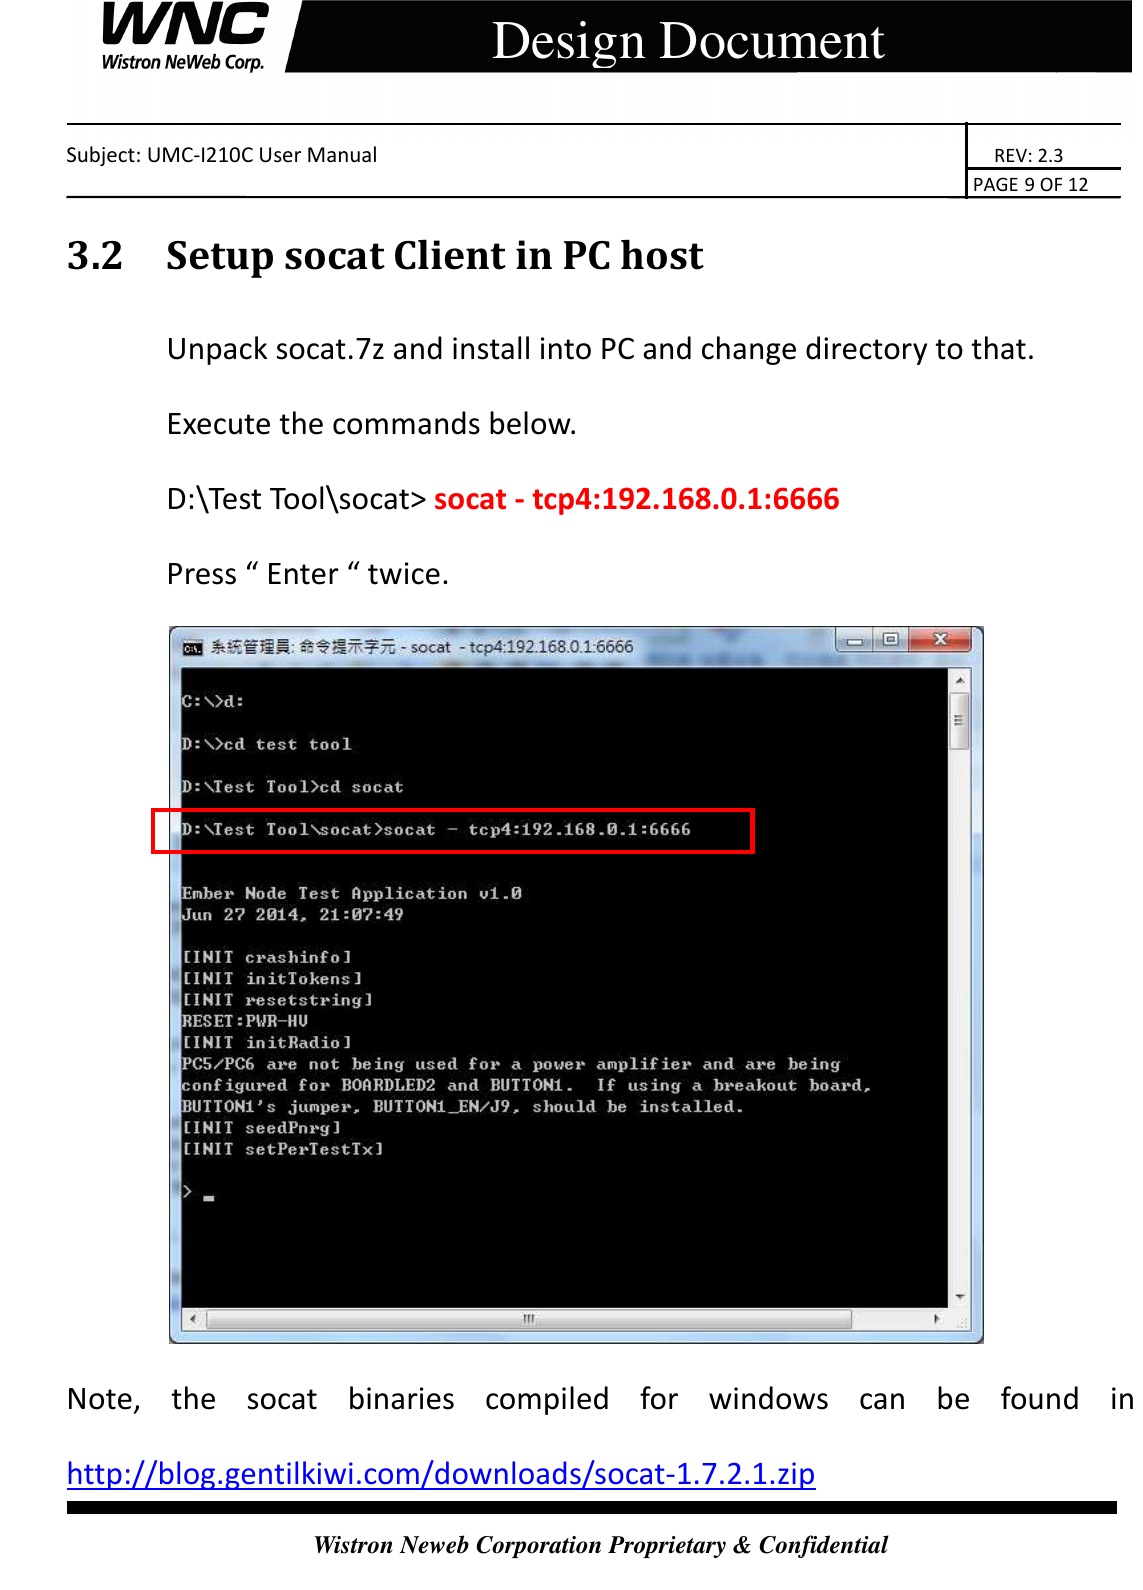    Subject: UMC-I210C User Manual                                                                       REV: 2.3                                                                                                                                                                               PAGE 9 OF 12  Wistron Neweb Corporation Proprietary &amp; Confidential     Design Document 3.2 Setup socat Client in PC host   Unpack socat.7z and install into PC and change directory to that. Execute the commands below. D:\Test Tool\socat&gt; socat - tcp4:192.168.0.1:6666 Press “ Enter “ twice.  Note,  the  socat  binaries  compiled  for  windows  can  be  found  in http://blog.gentilkiwi.com/downloads/socat-1.7.2.1.zip 